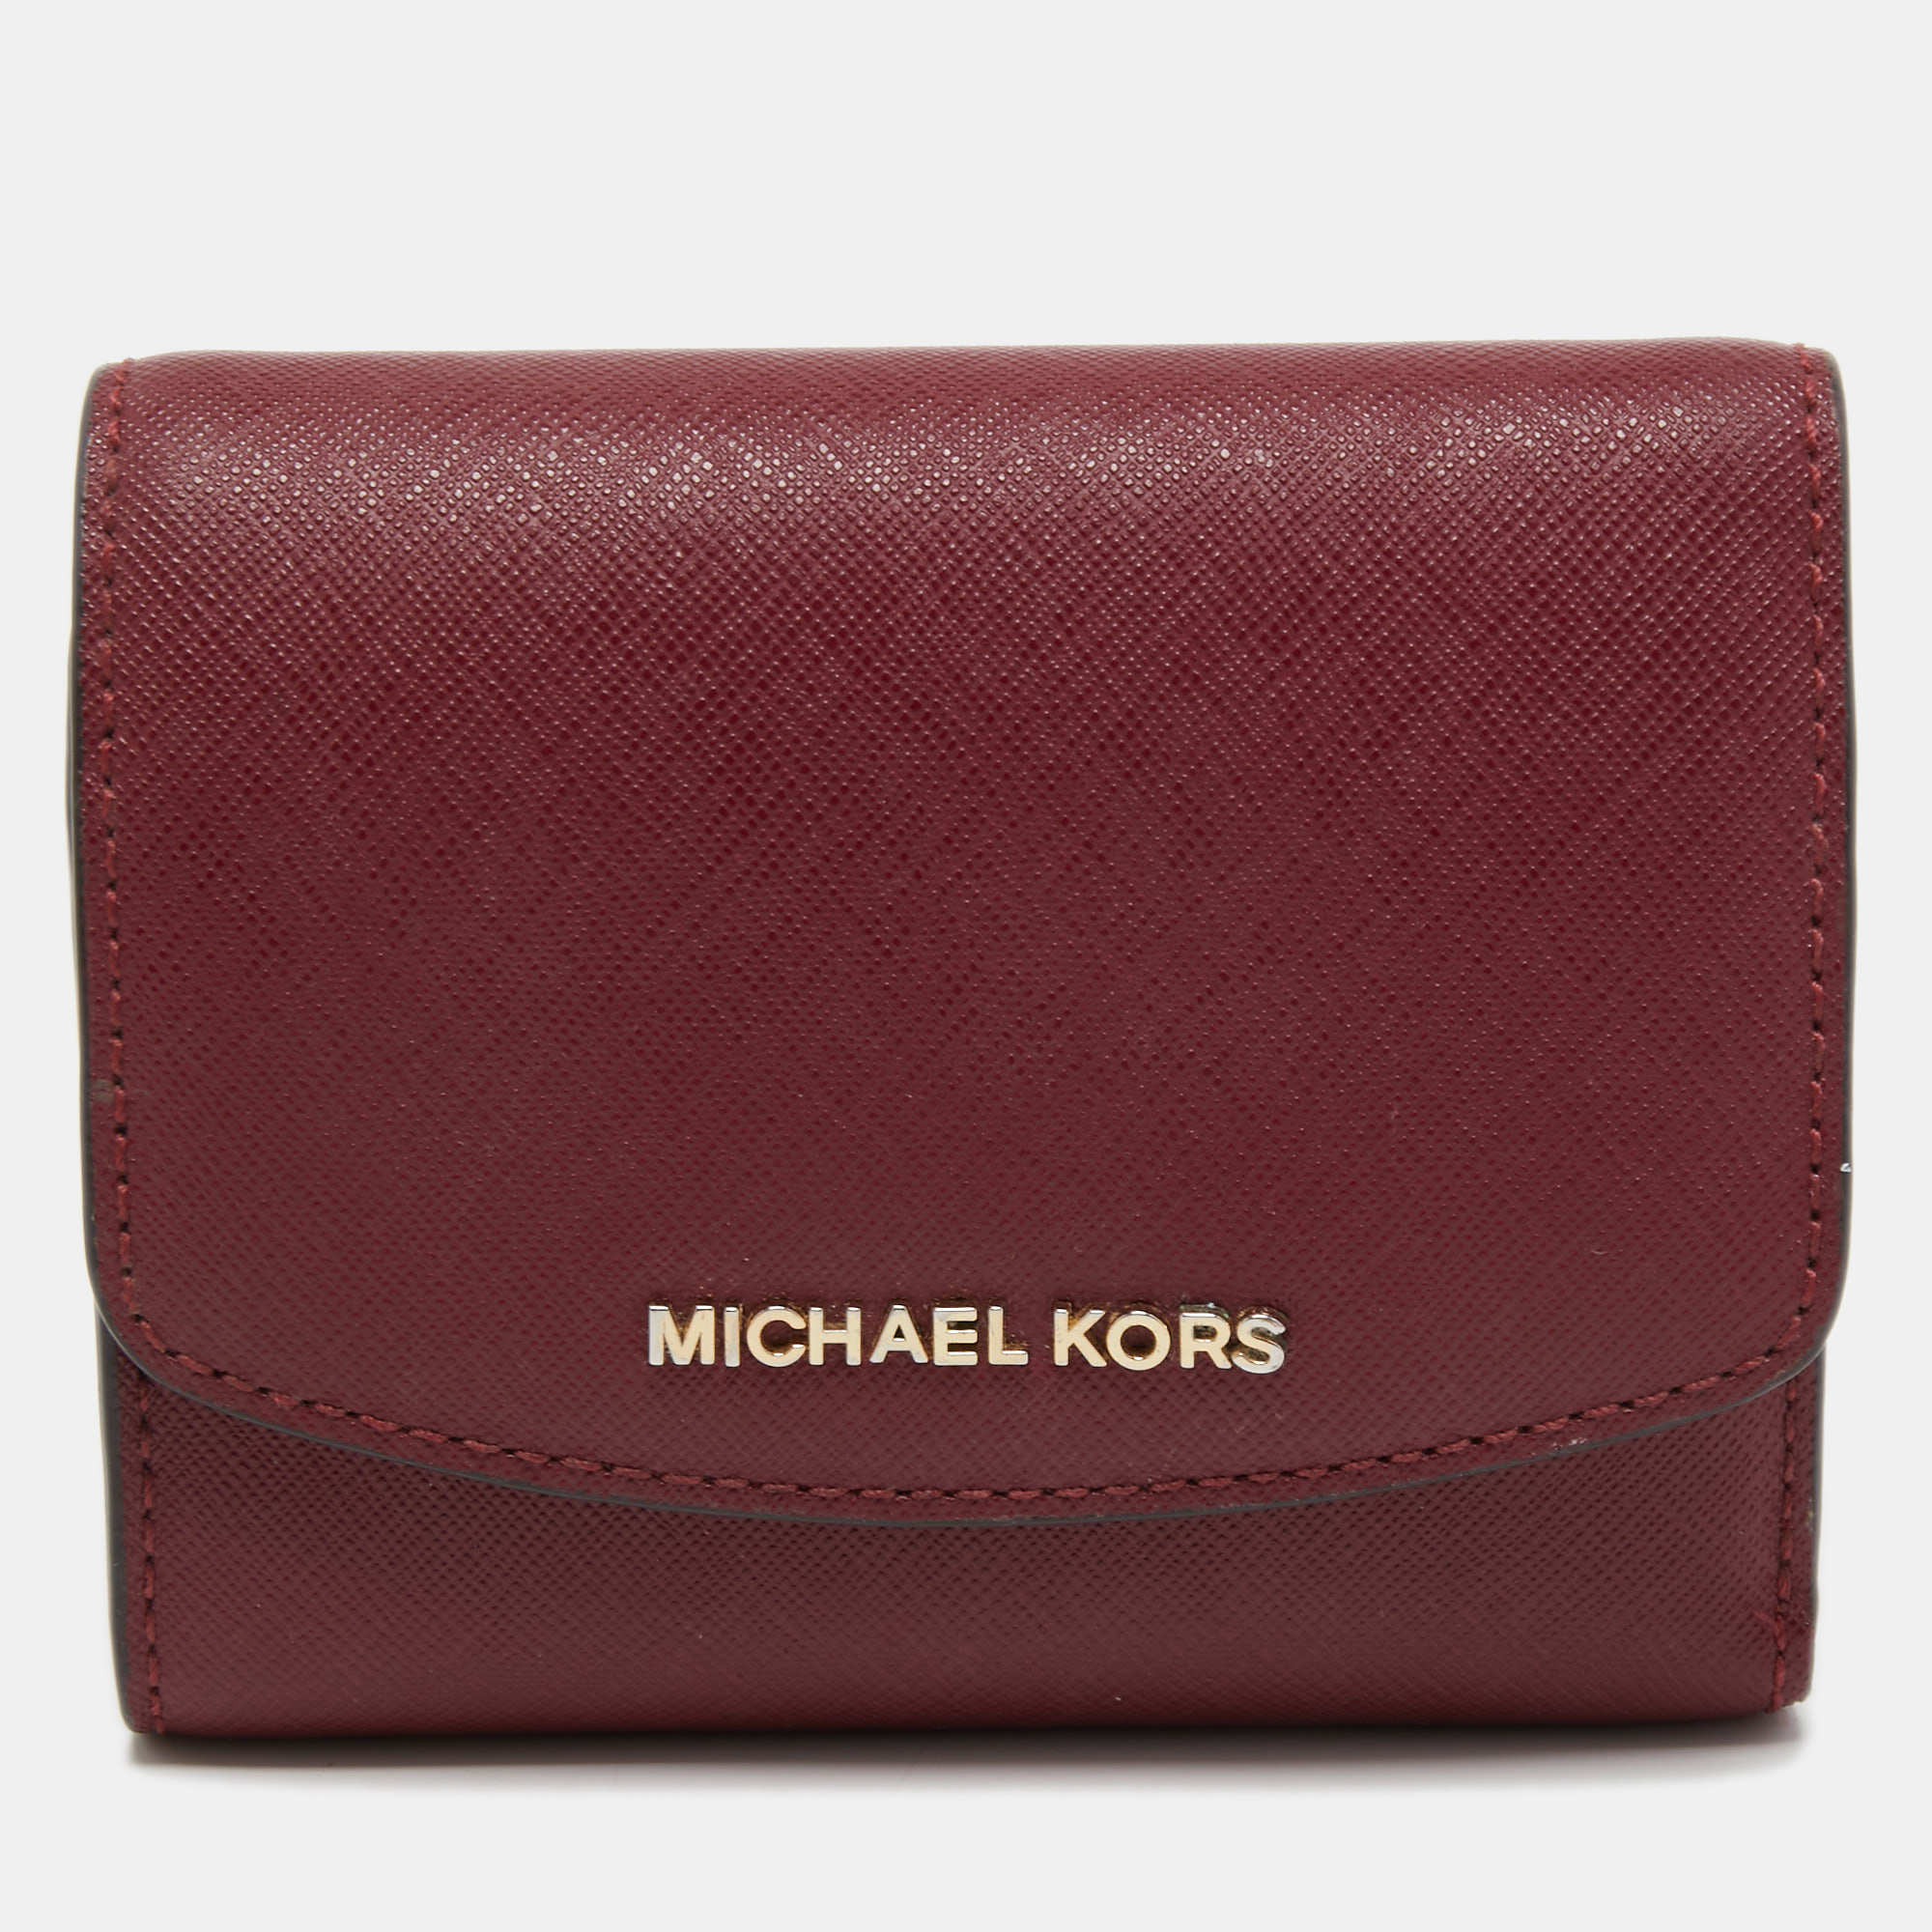 Pre-owned Michael Kors Burgundy Saffiano Leather Jet Set Trifold Wallet